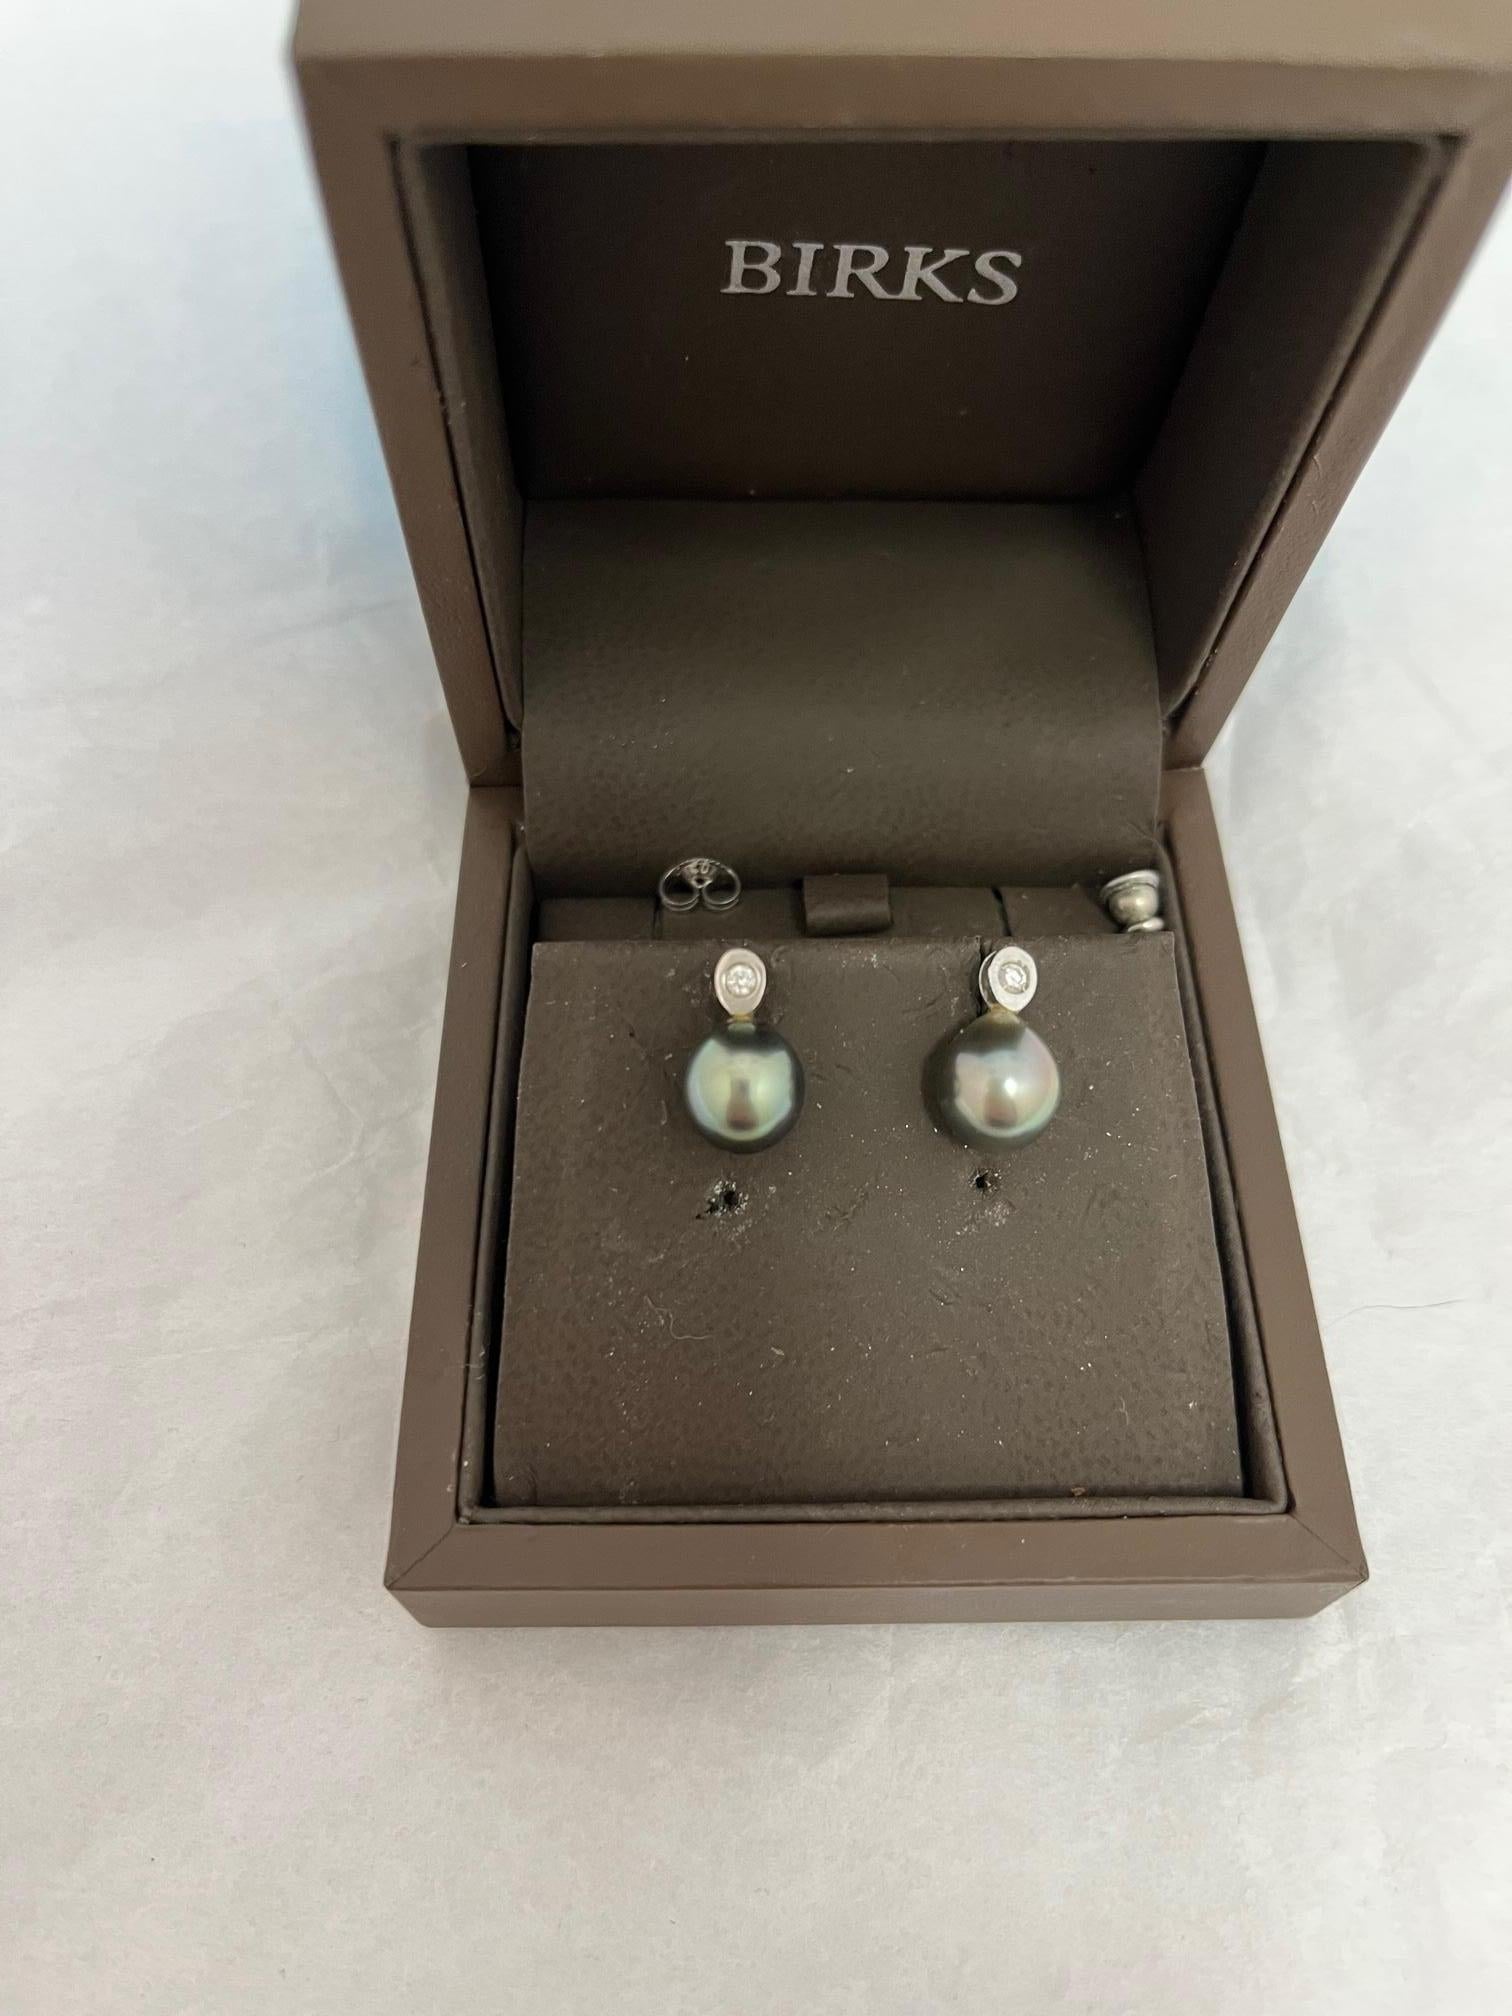 Birks is a Canadian high end jewelry store first opened in Montreal in 1879, by Henry Birks who was a master silversmith from  Sheffield, England.
This is a beautifully crafted pair of pierced earrings in their original boxes. The Tahitian cultured